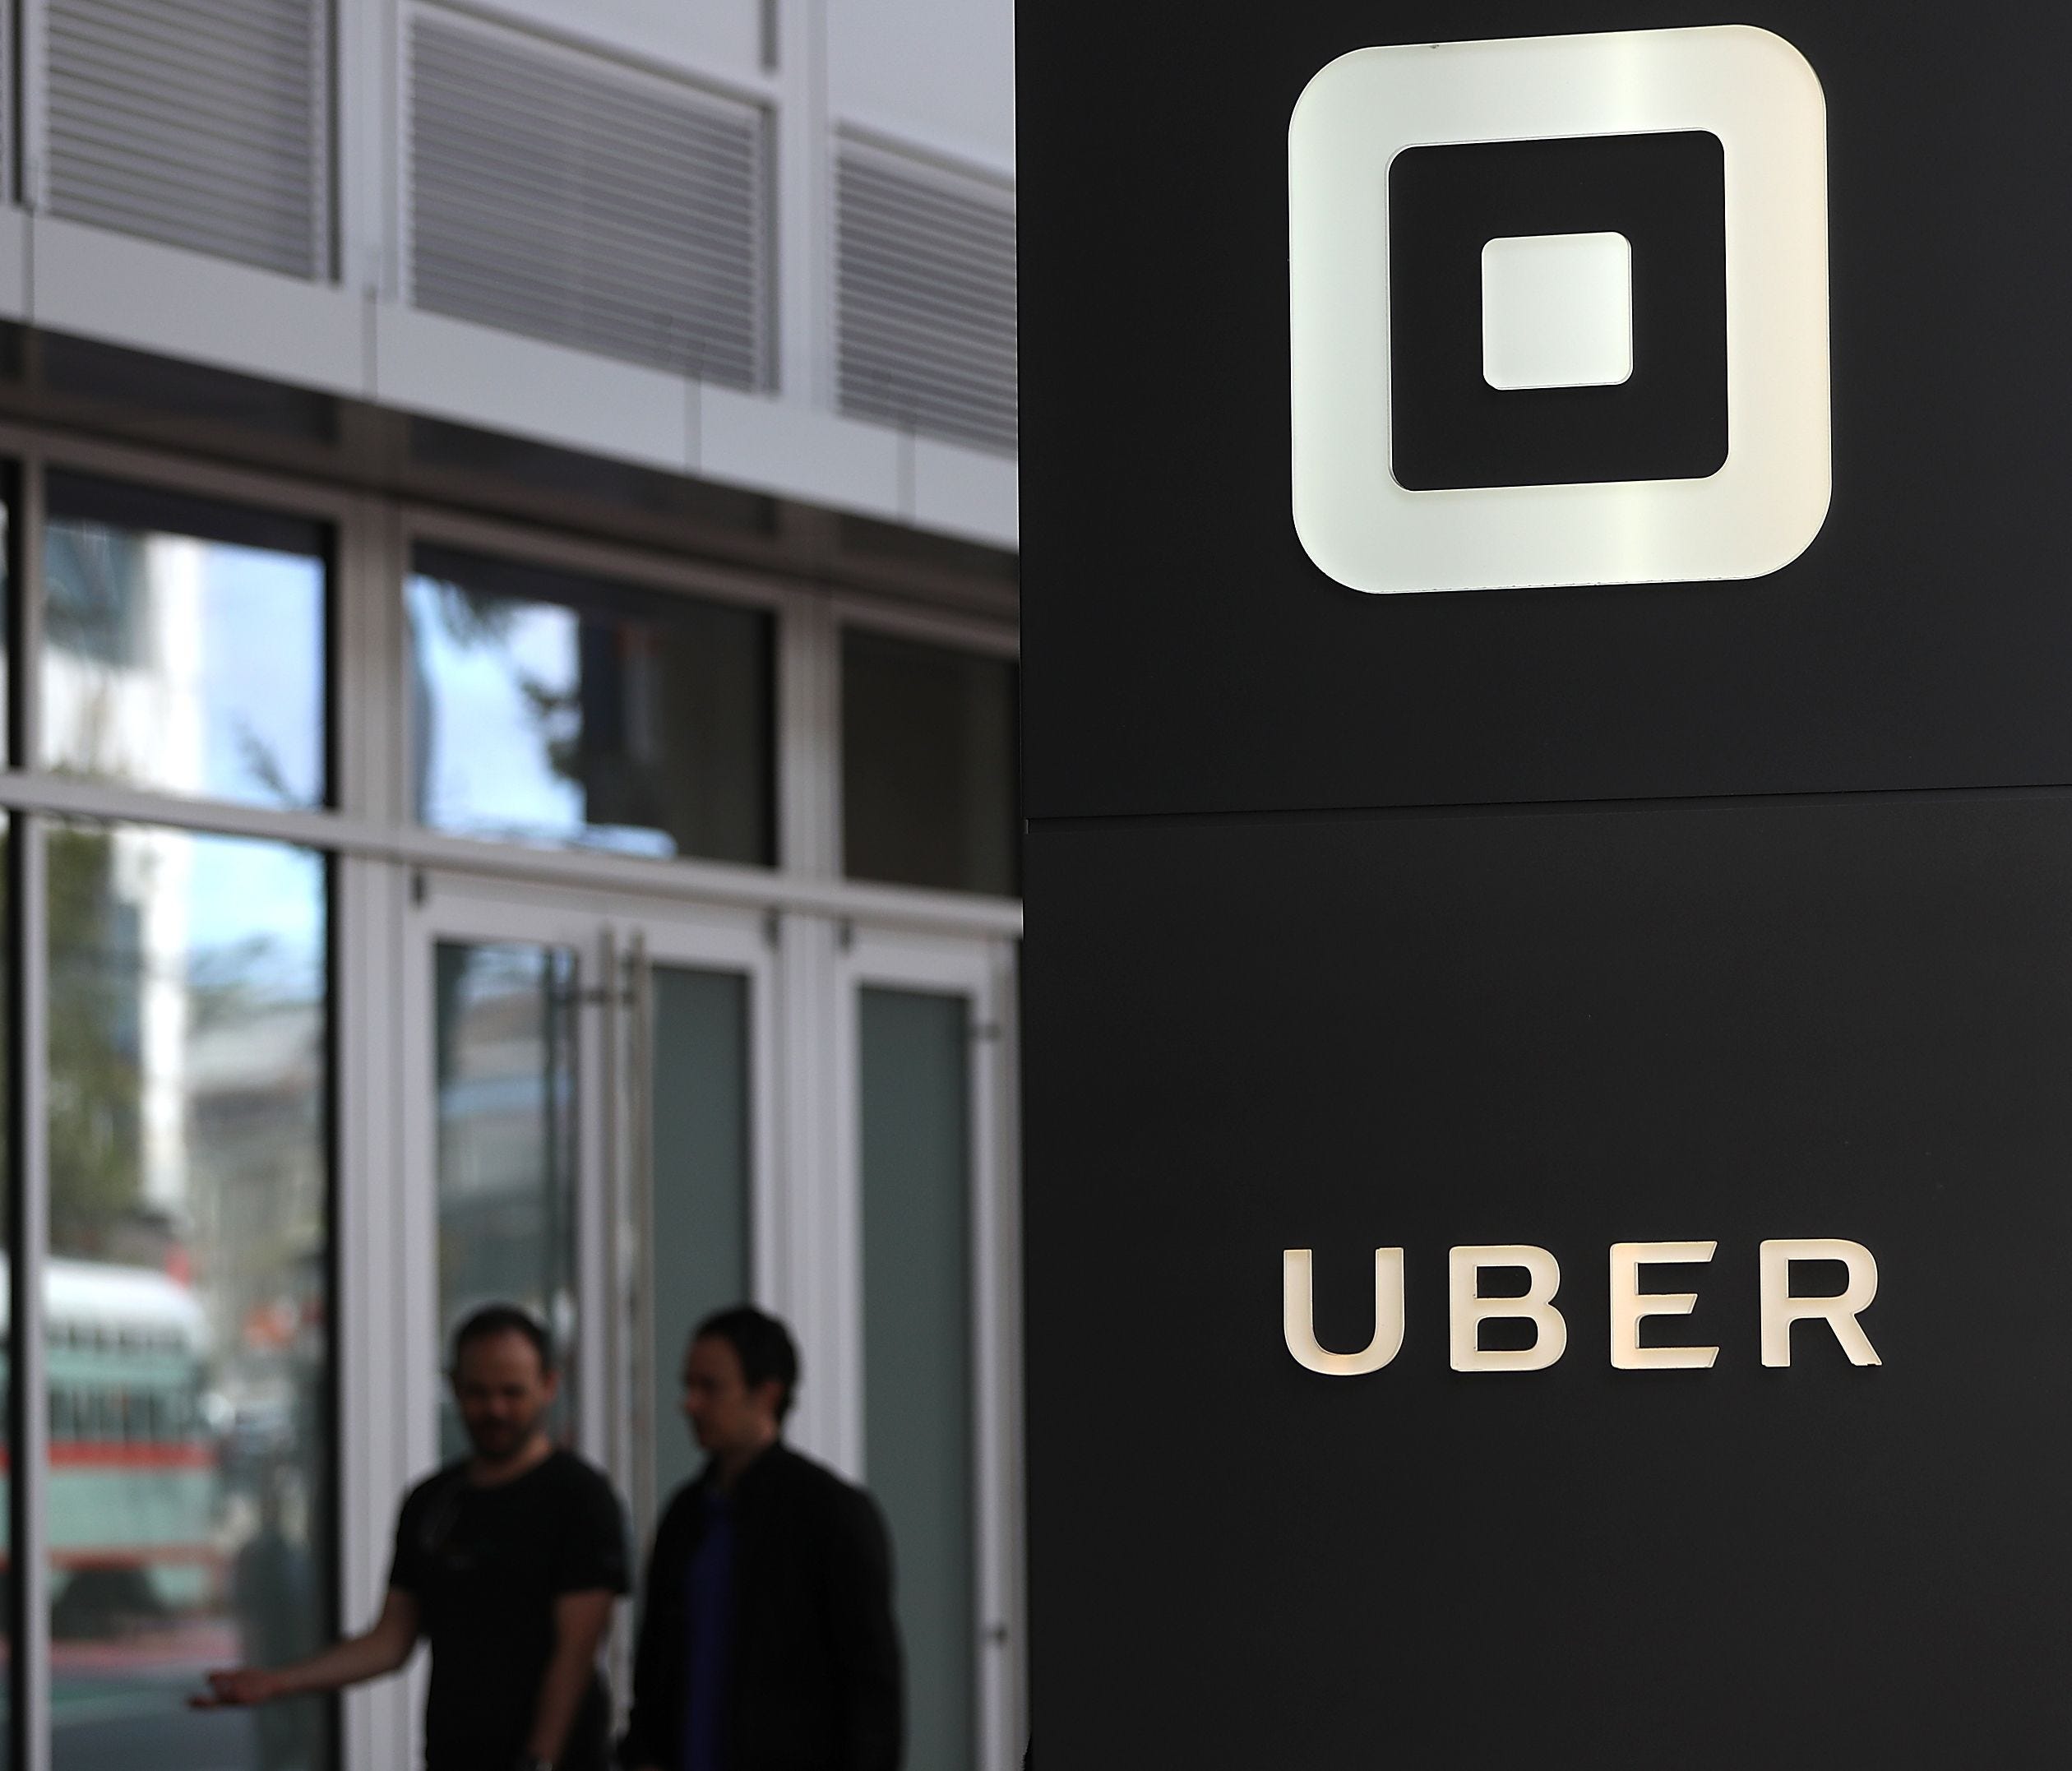 File photo taken in 2016 shows the logo of online ride-hailing company Uber Technologies in front of its San Francisco headquarters.